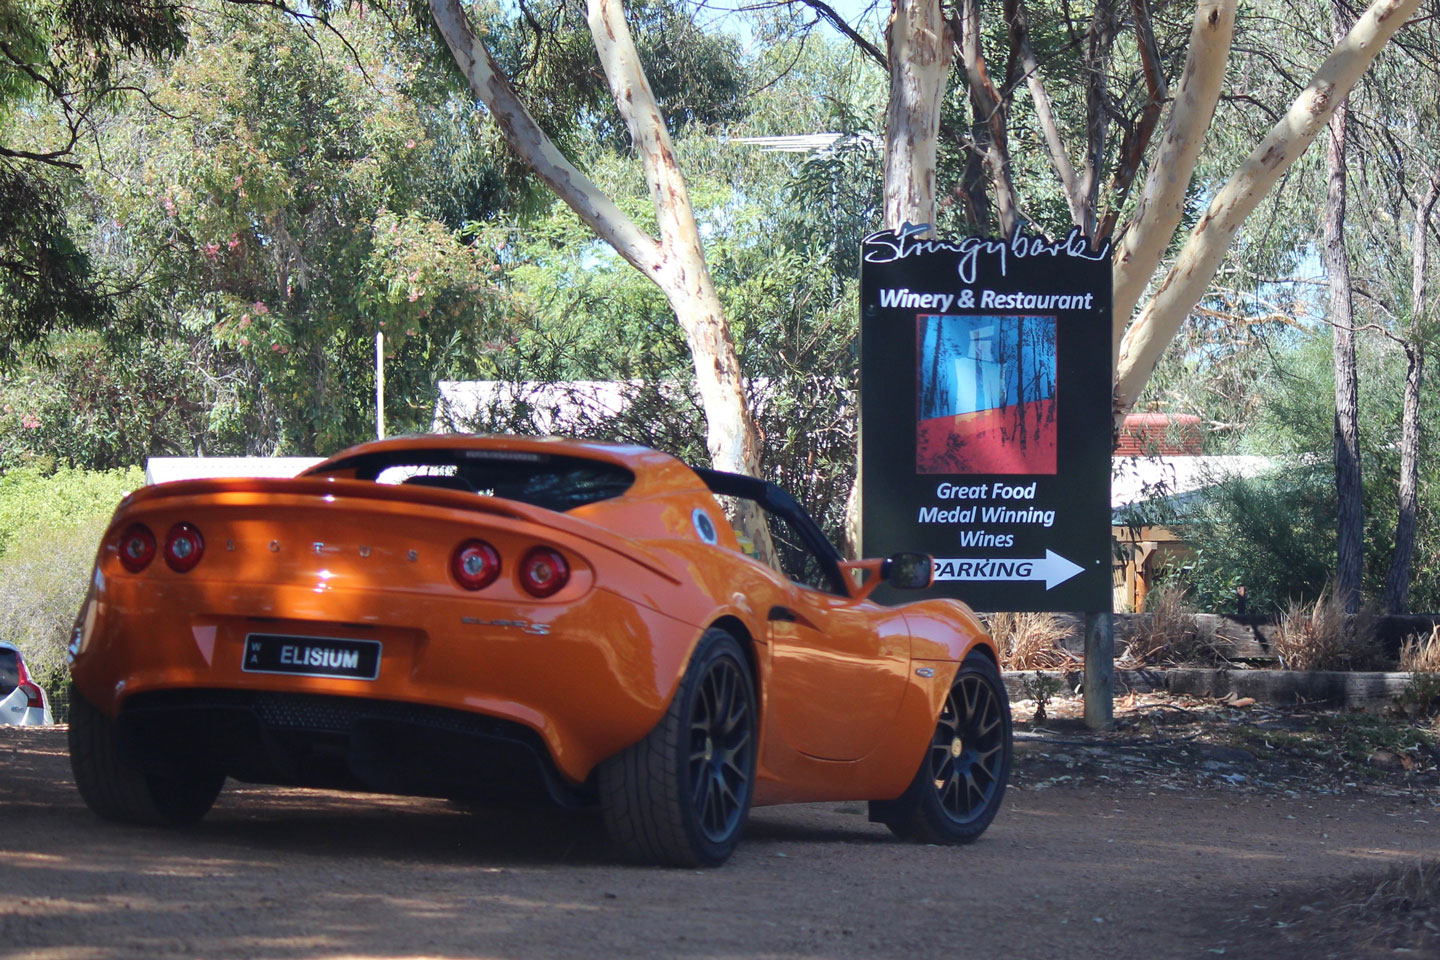 Arriving at the Stringybark Winery & Restaurant